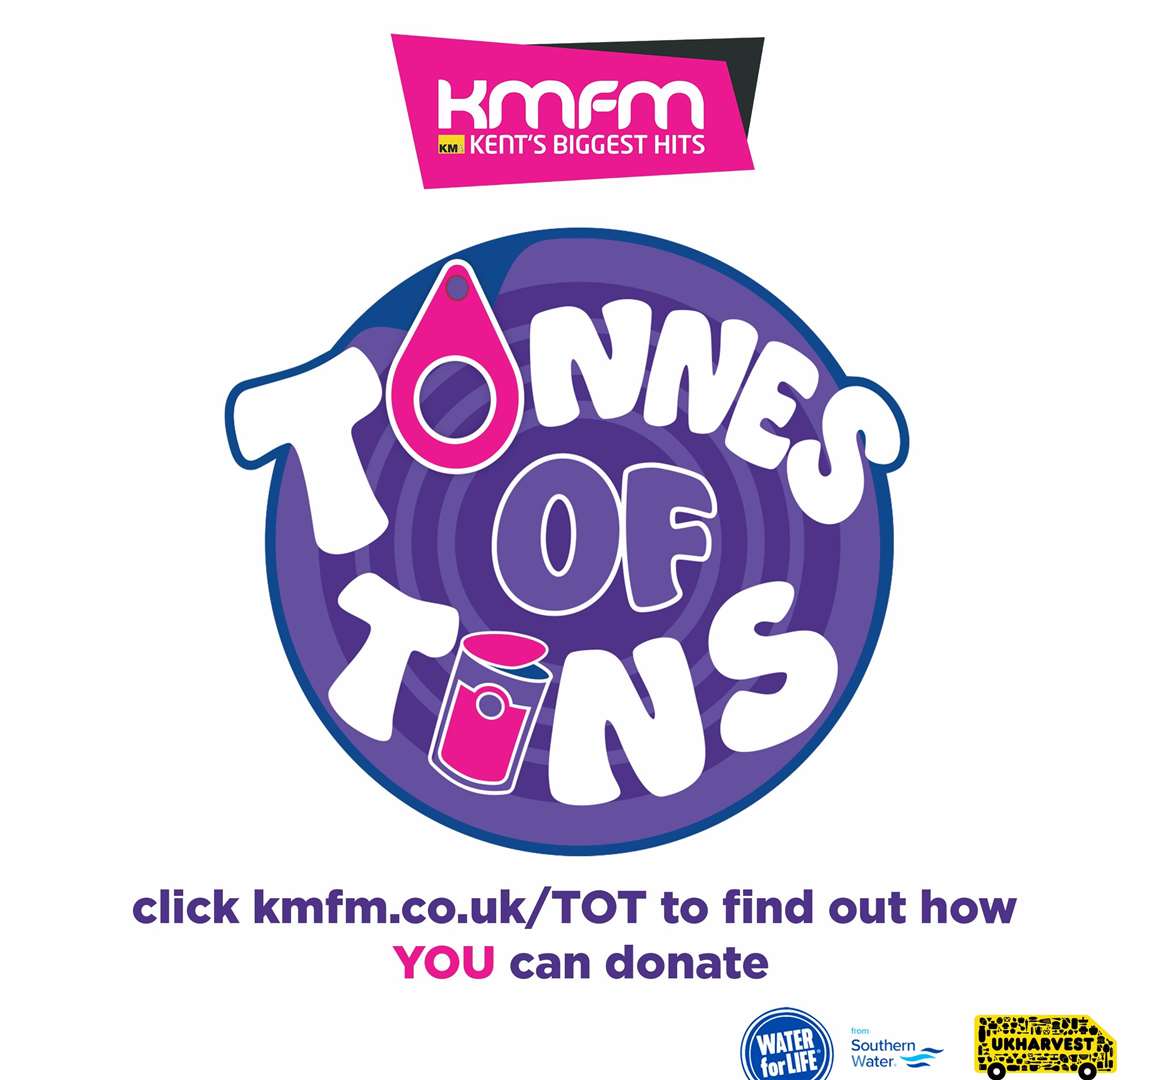 To help people relying on food banks to get by, kmfm is partnering with UK Harvest to collect as many tonnes of tins as possible over the next six weeks